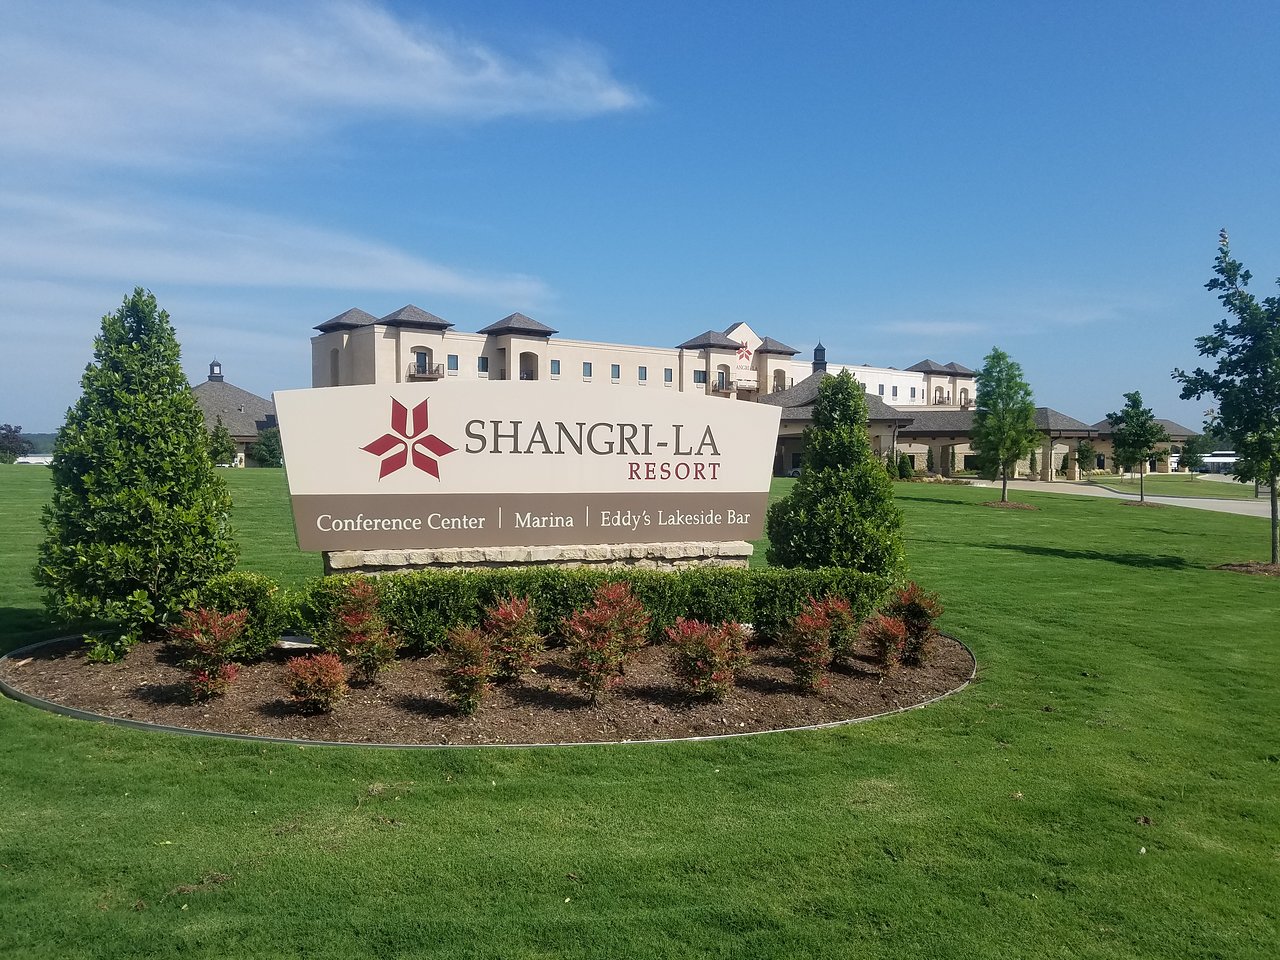 The New Resort Activity Center at Shangri-La Opens in April 2021